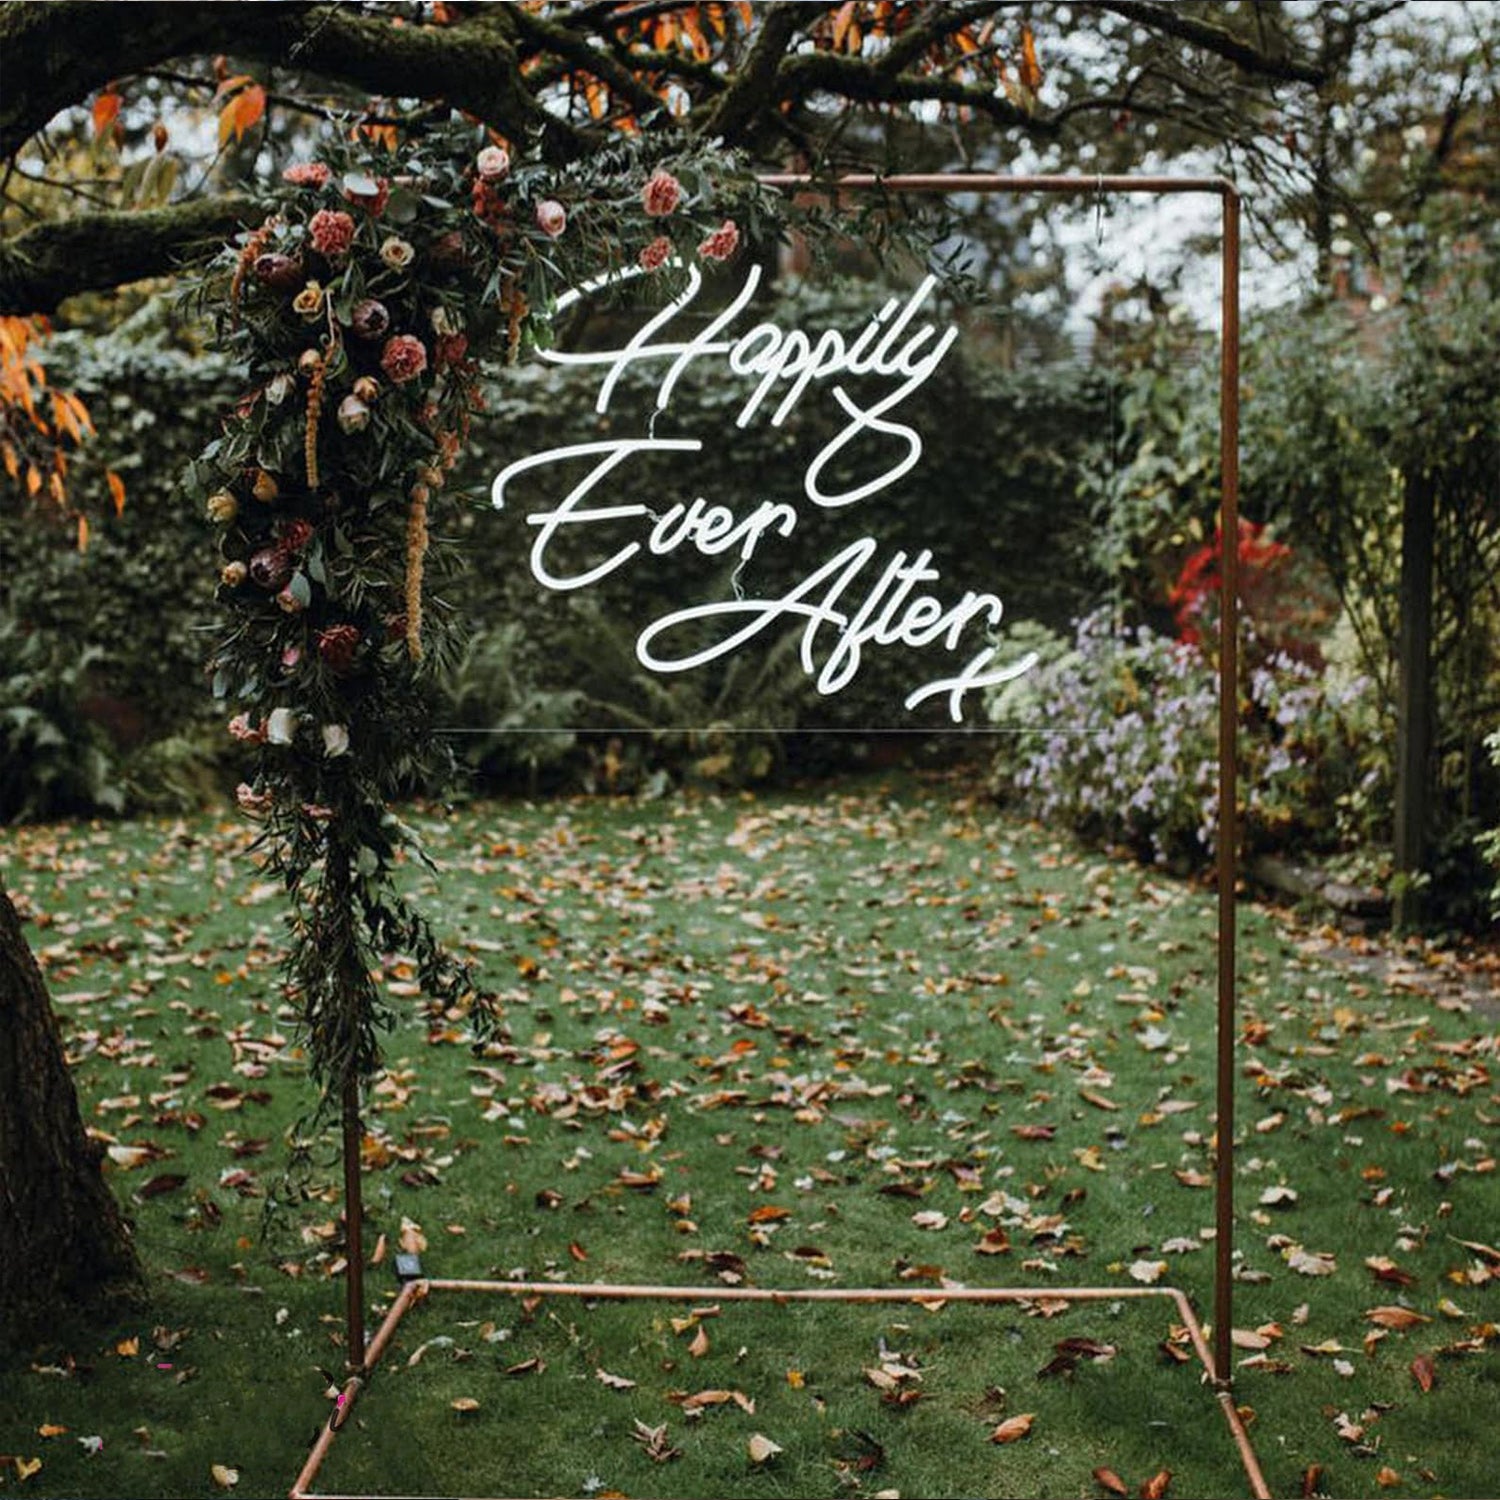 NEONIP-100% Handmade Happily Ever After LED Neon Wedding Sign